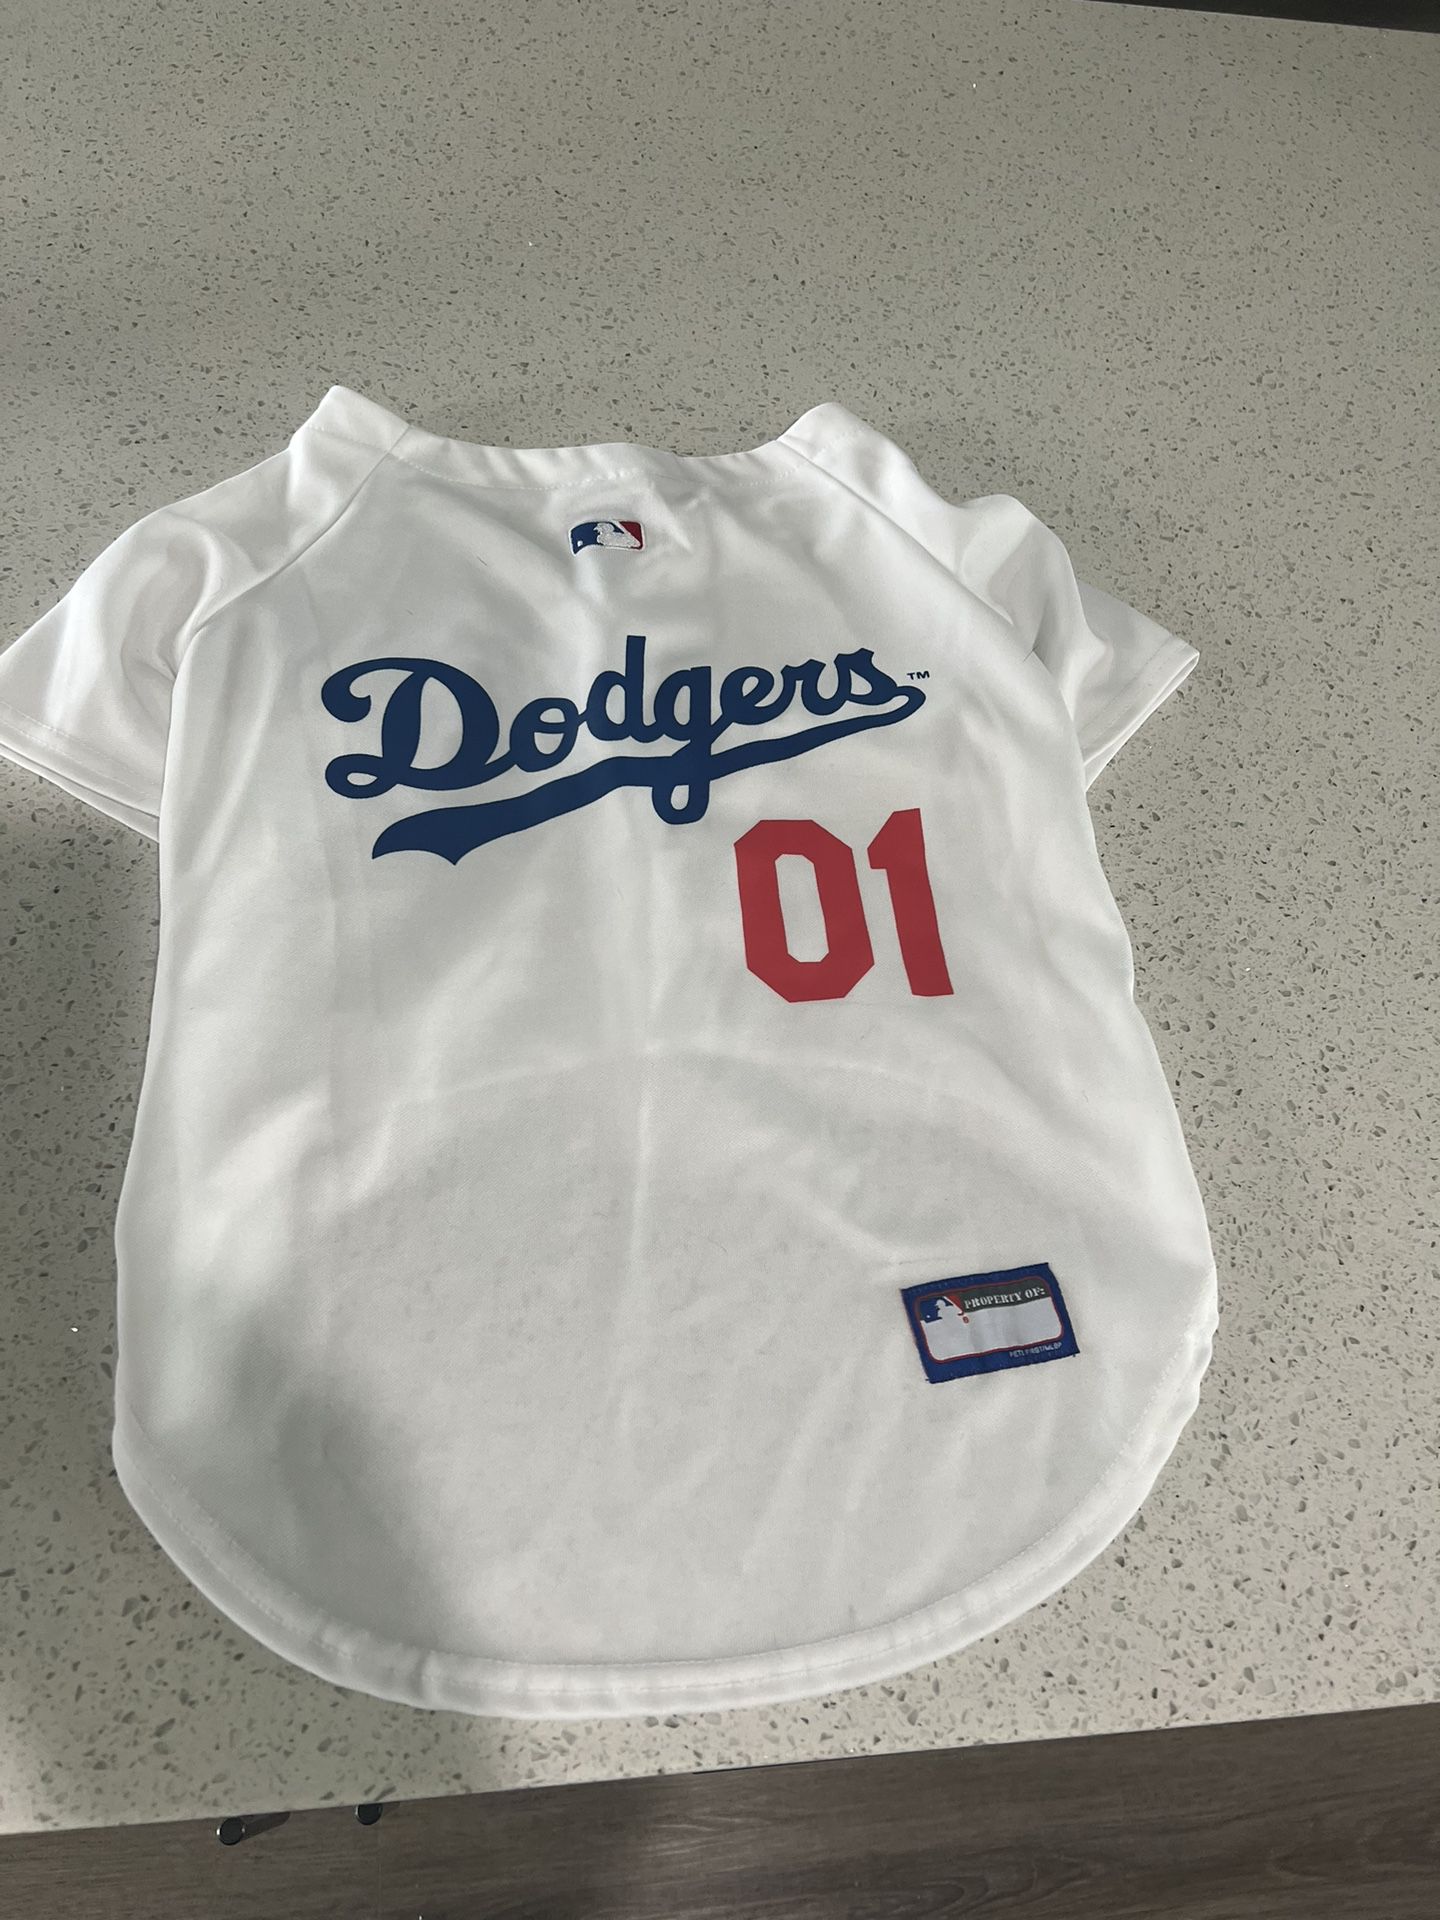 Large Dog Dodgers Jersey for Sale in Covina, CA - OfferUp